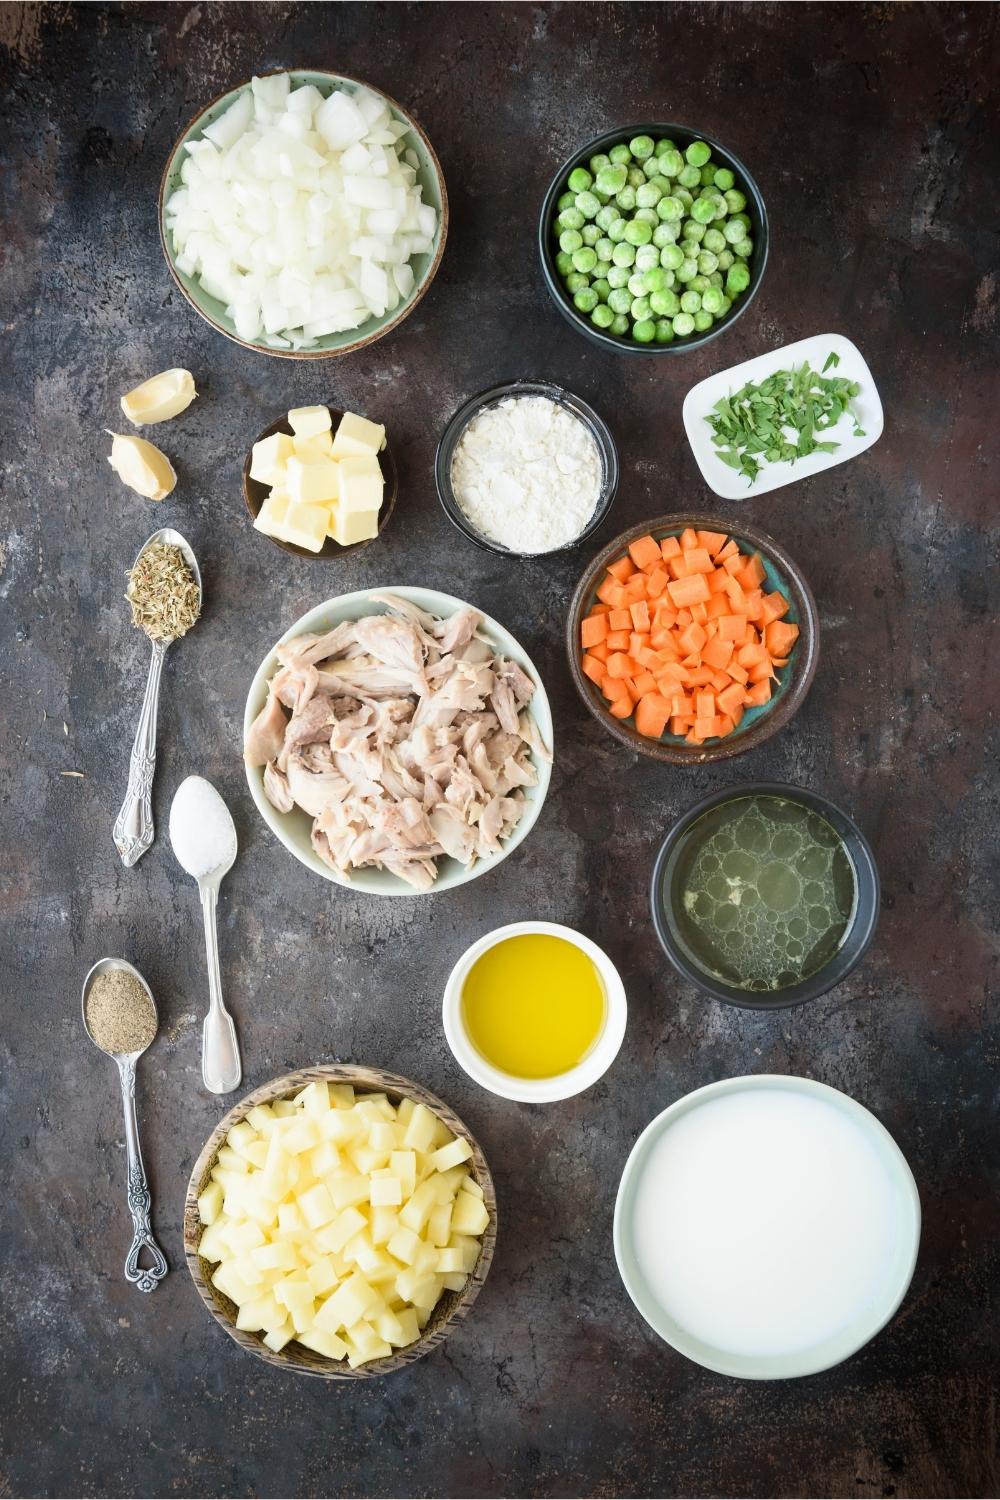 Bowls of shredded cooked chicken, chopped onions, frozen peas, butter, flour, chopped parsley, diced carrots, chicken broth, olive oil, heavy cream, chopped potatoes, teaspoonfuls of spices, and two garlic cloves.